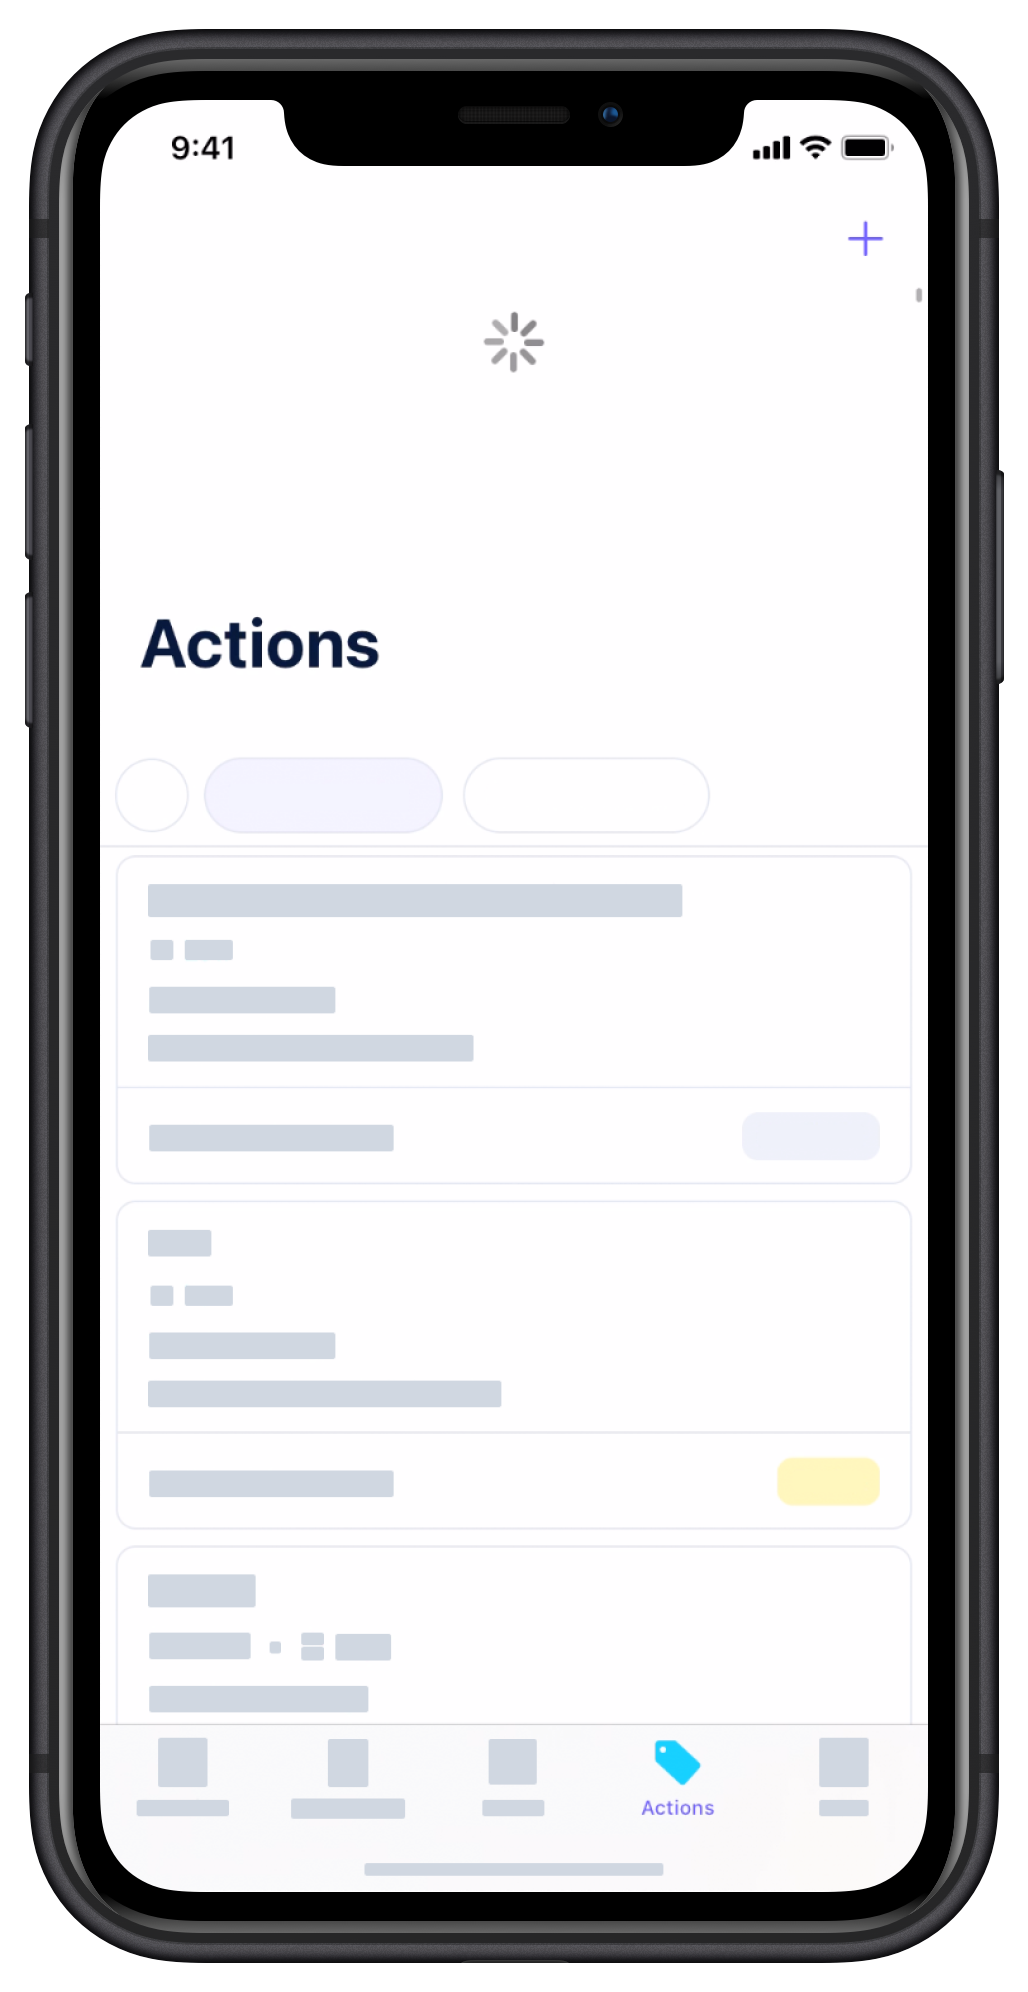 A screenshot showing the process of refreshing the Actions tab on iPhone.